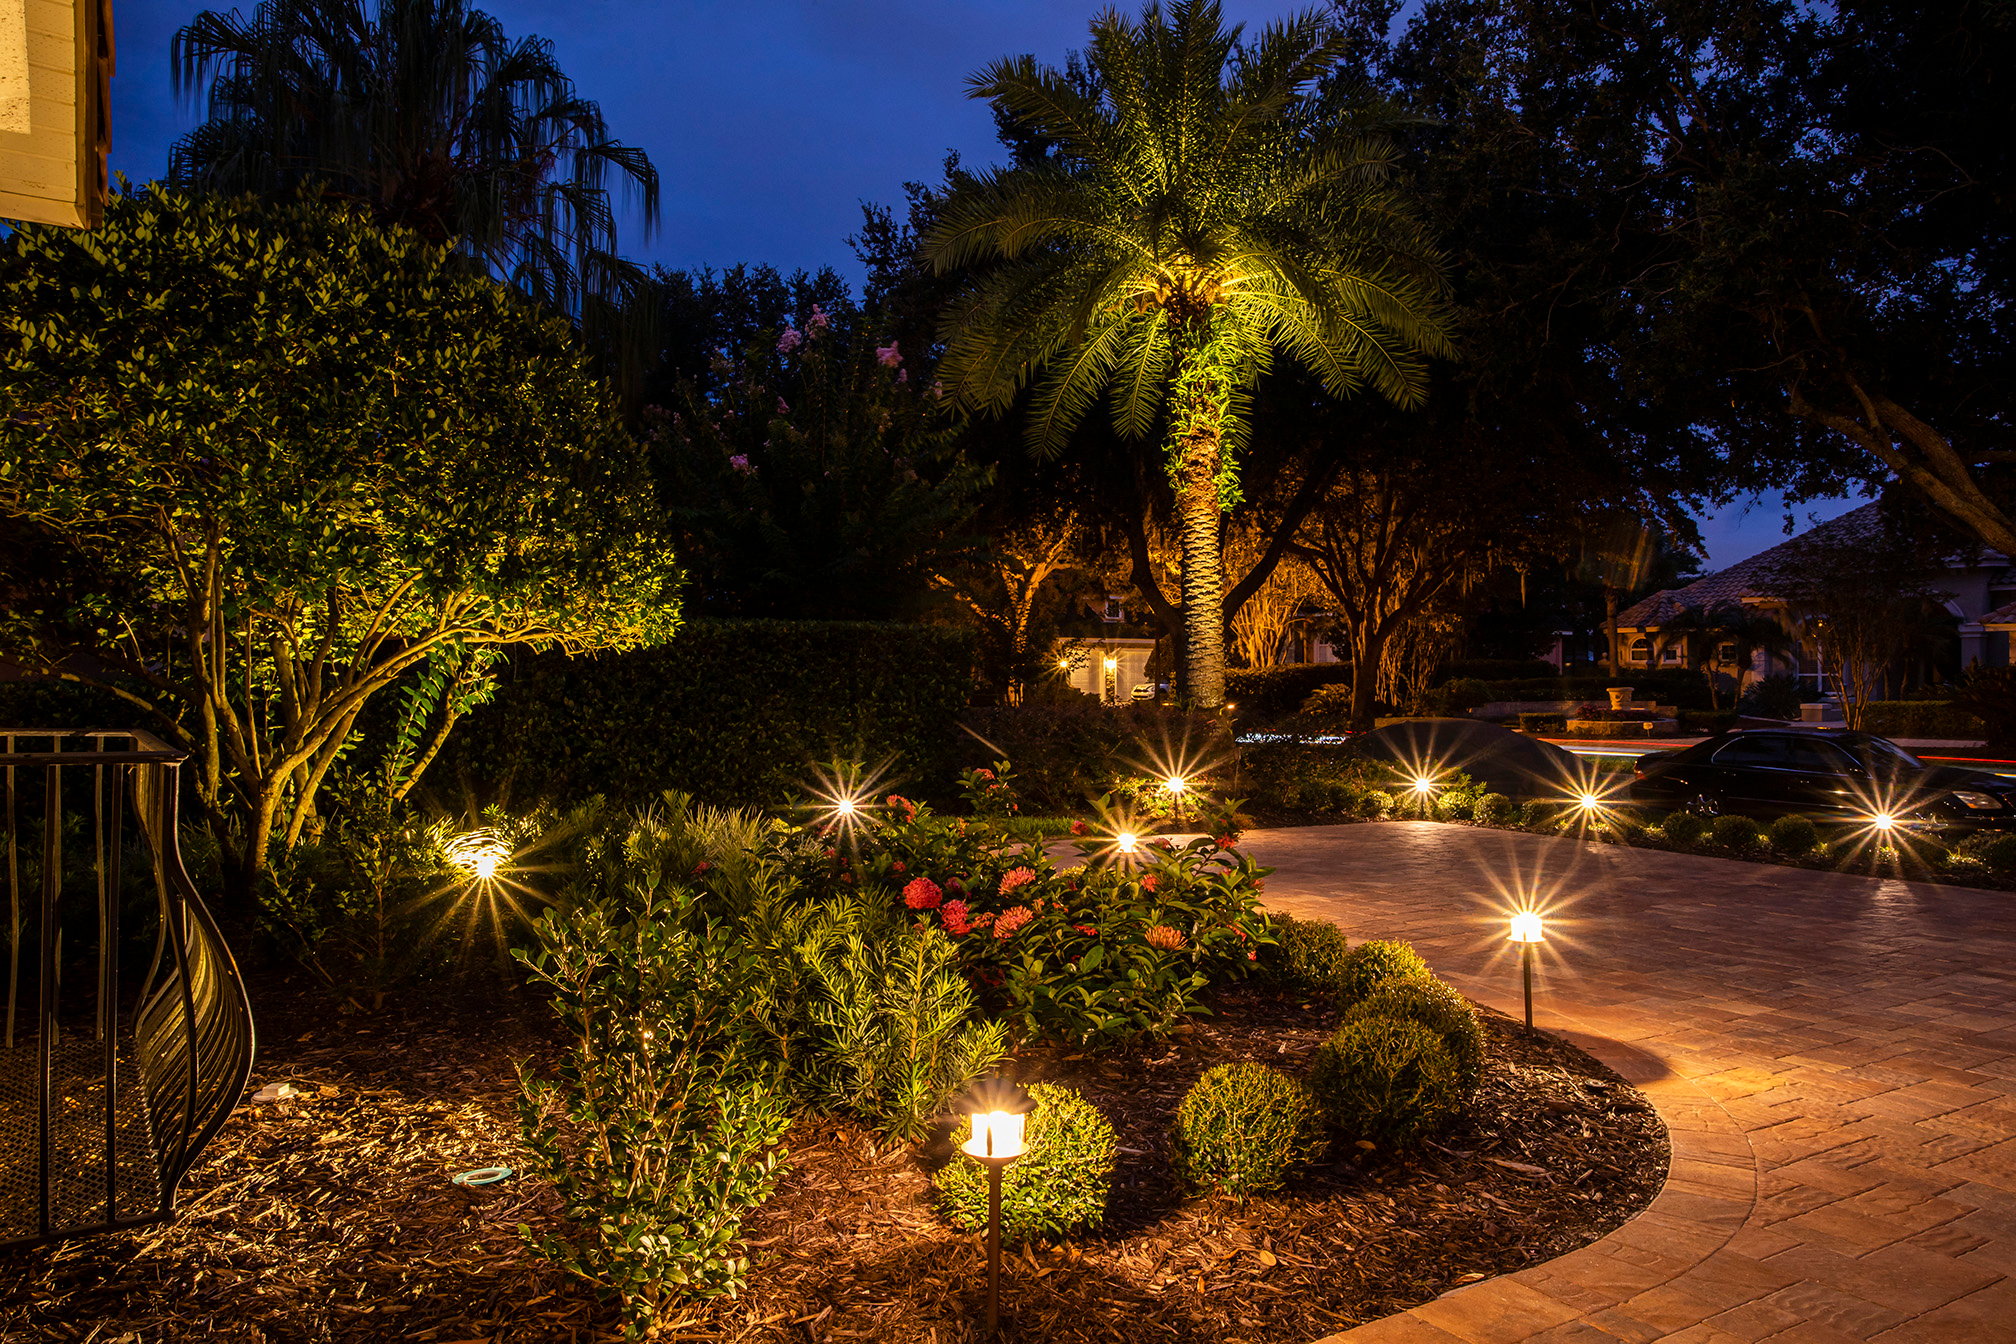 landscape lighting around a patio with planting beds and palm trees